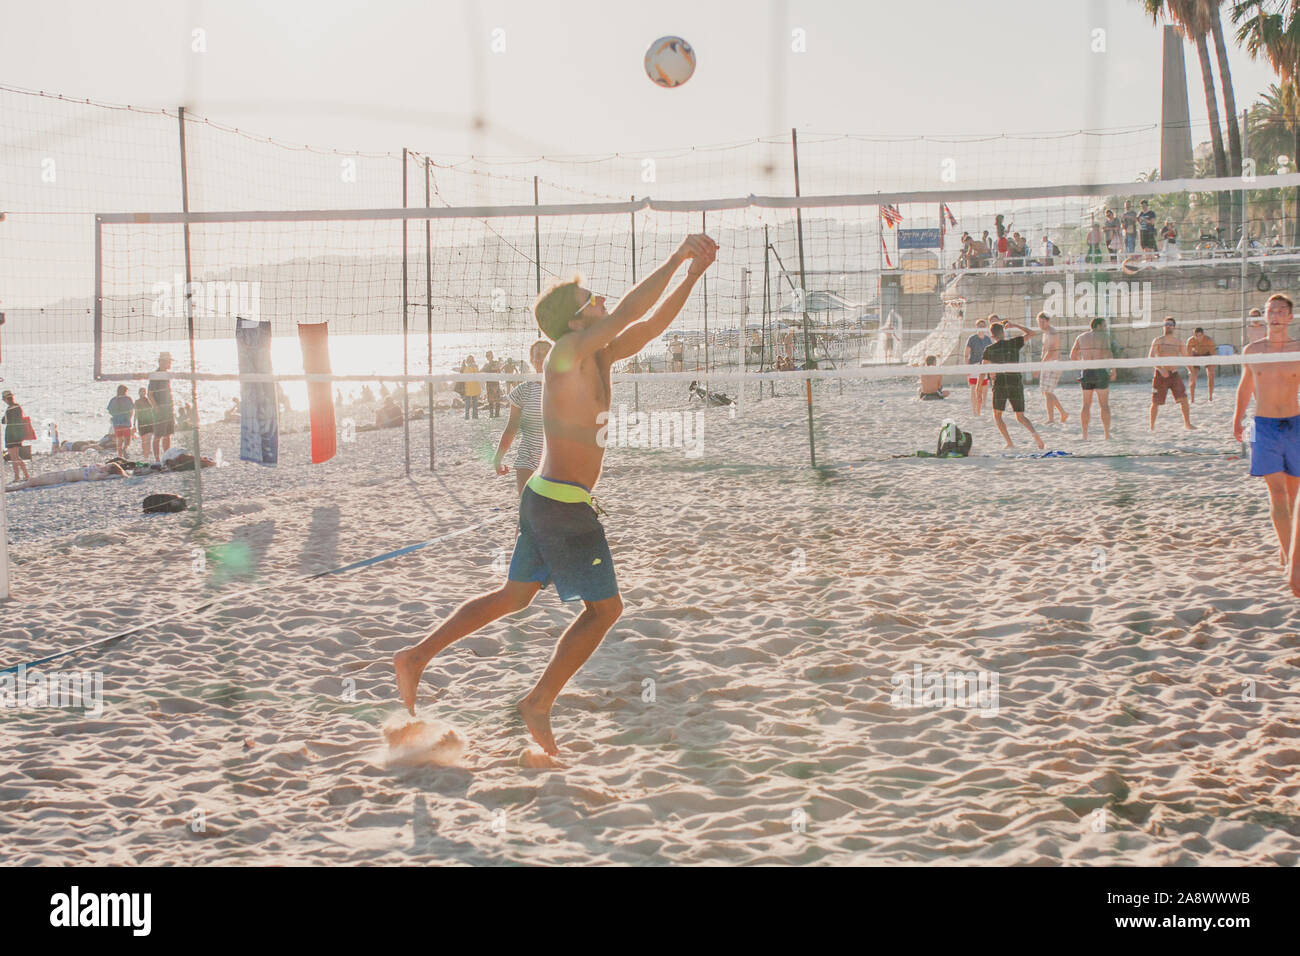 Nice, Provence / France - September 28, 2018: Young people on the beach playing beach volleyball Stock Photo